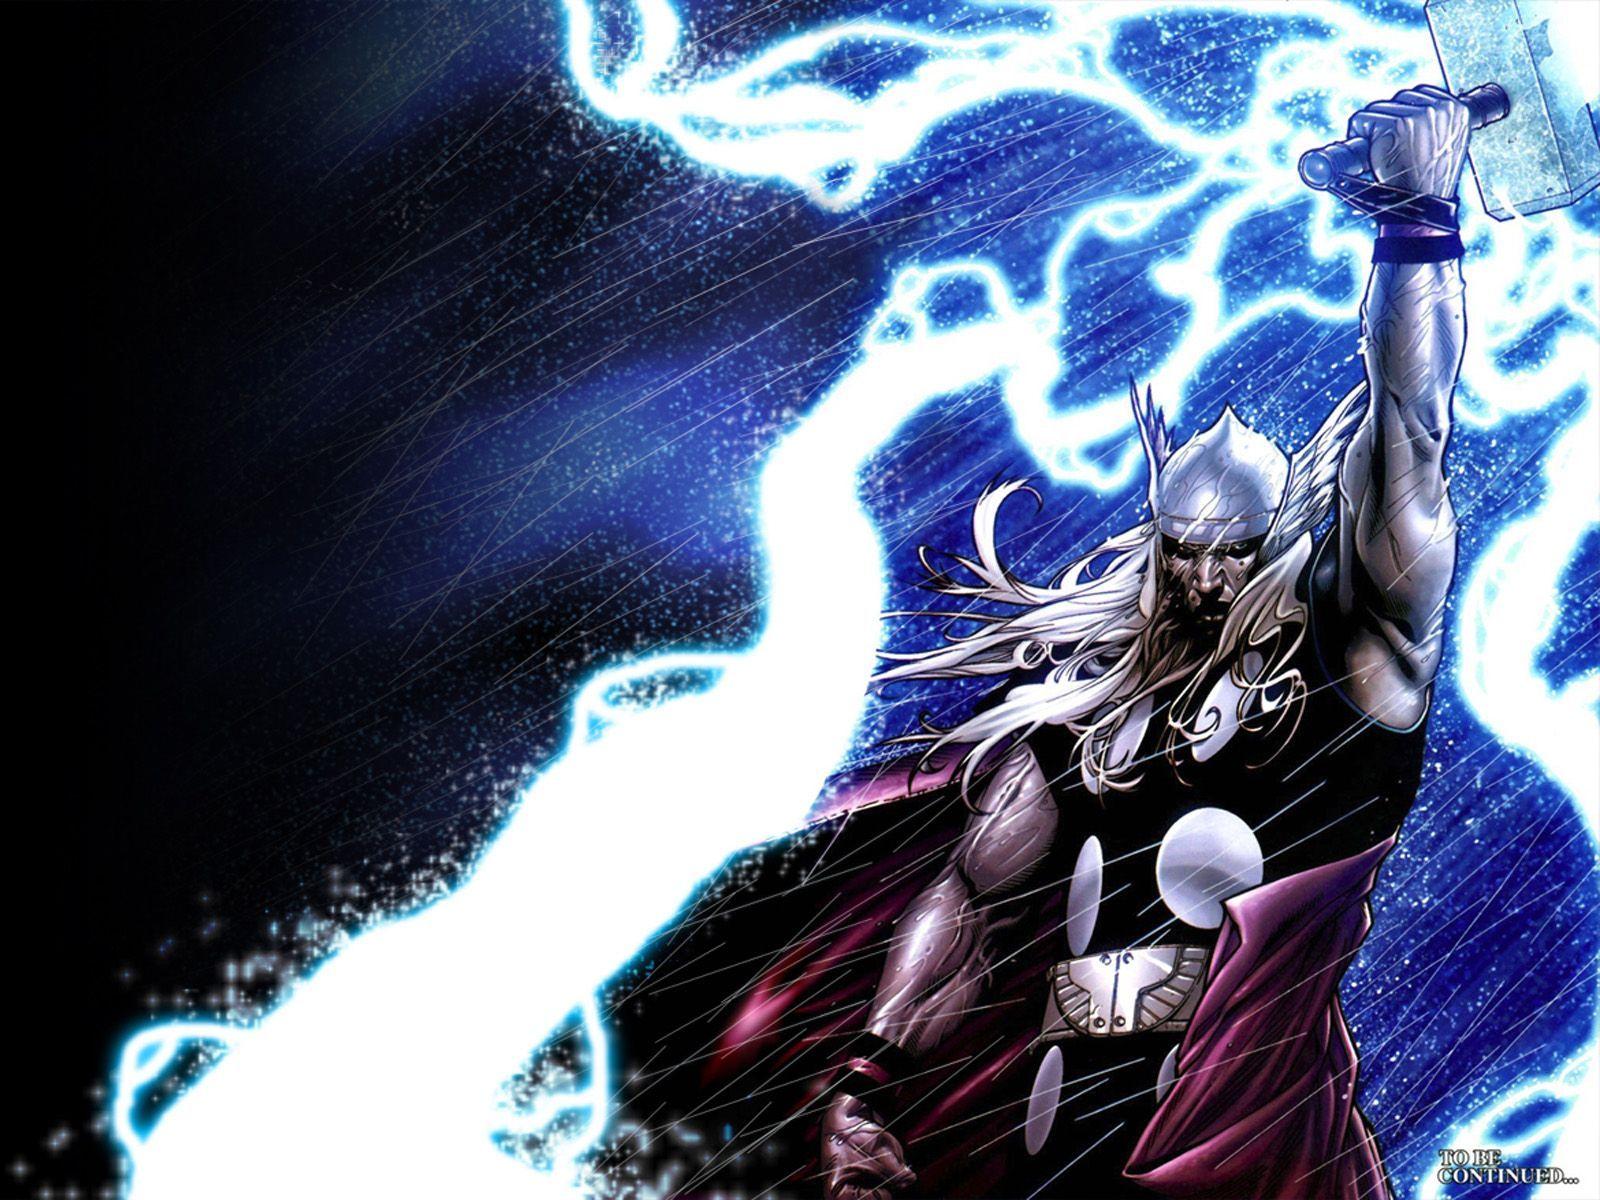 Thor with Lightning nerd power is overwhelming